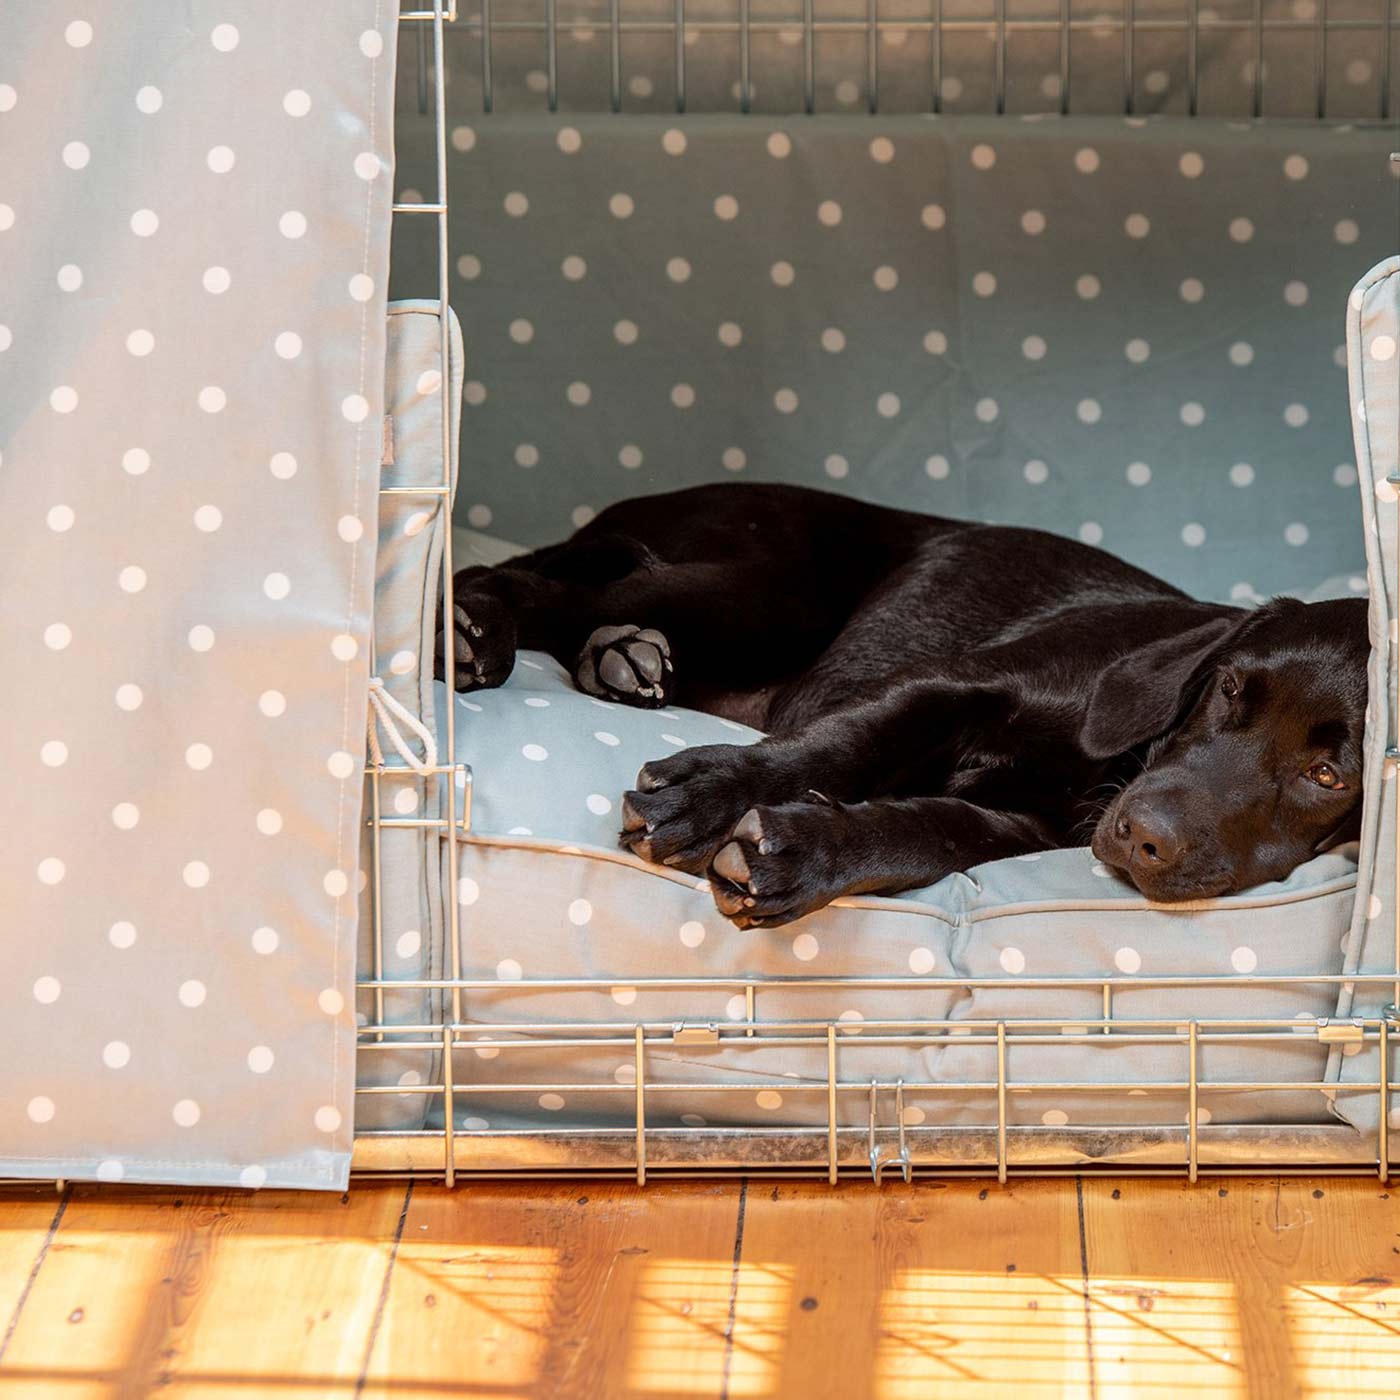 Luxury Heavy Duty Dog Cage, In Stunning Duck Egg Spot Oil Cloth Cage Set, The Perfect Dog Cage Set For Building The Ultimate Pet Den! Dog Cage Cover Available To Personalize at Lords & Labradors US